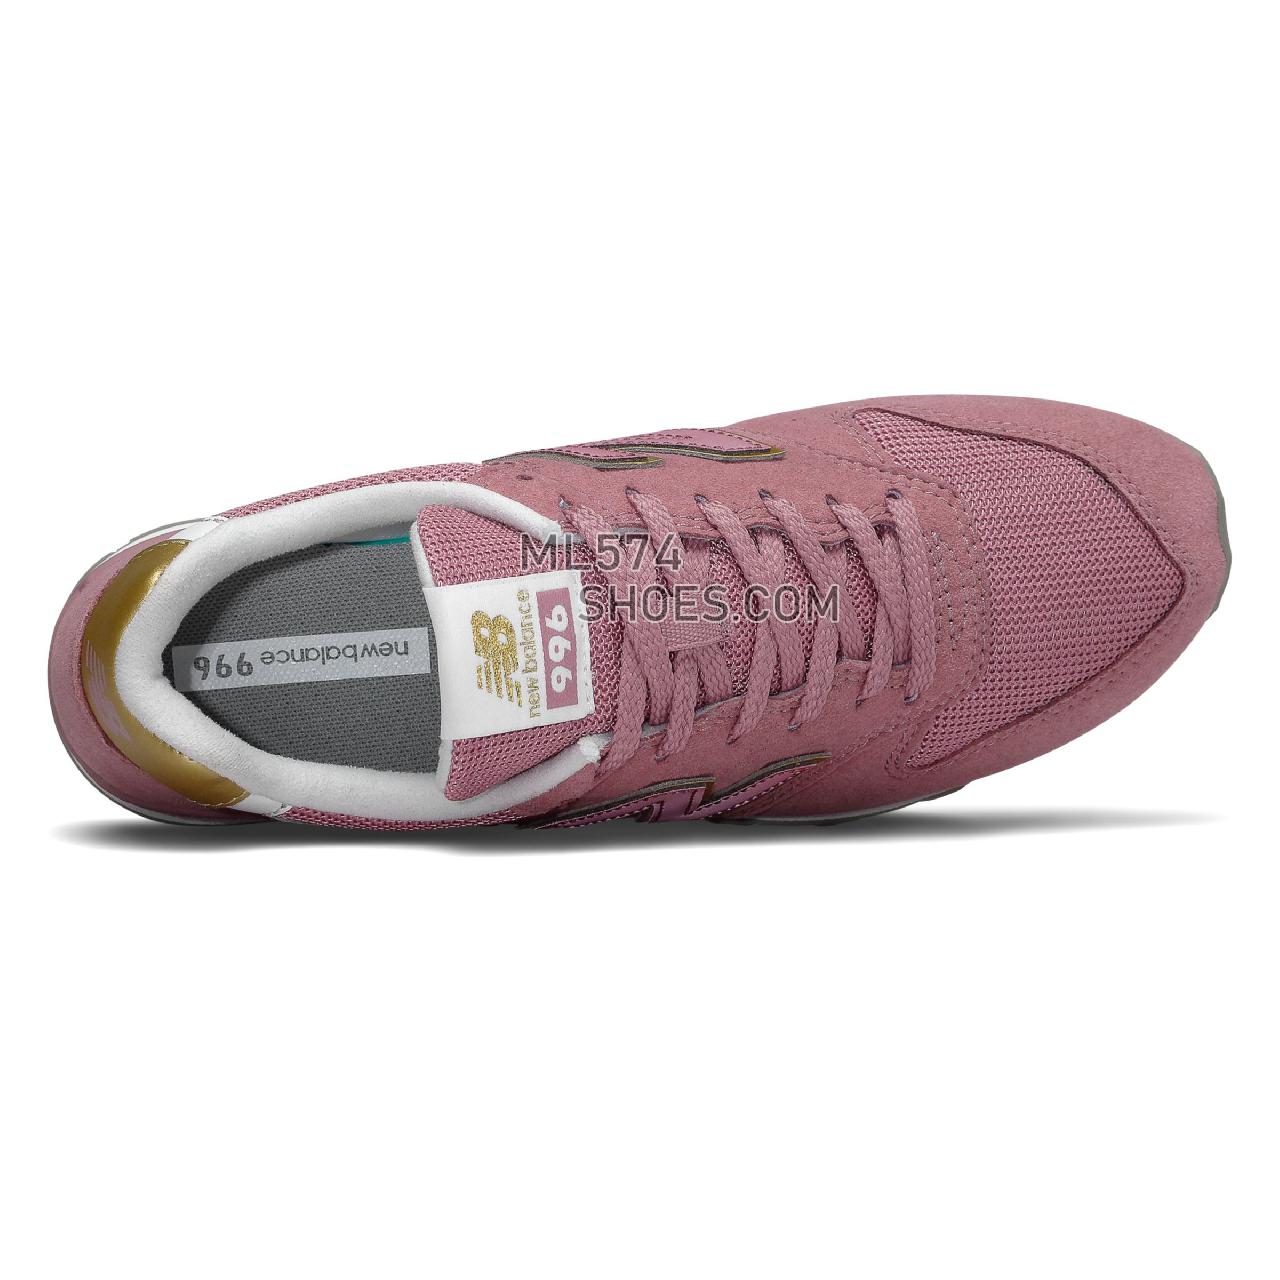 New Balance 996 - Women's Classic Sneakers - Pink with Classic Gold - WL996CP